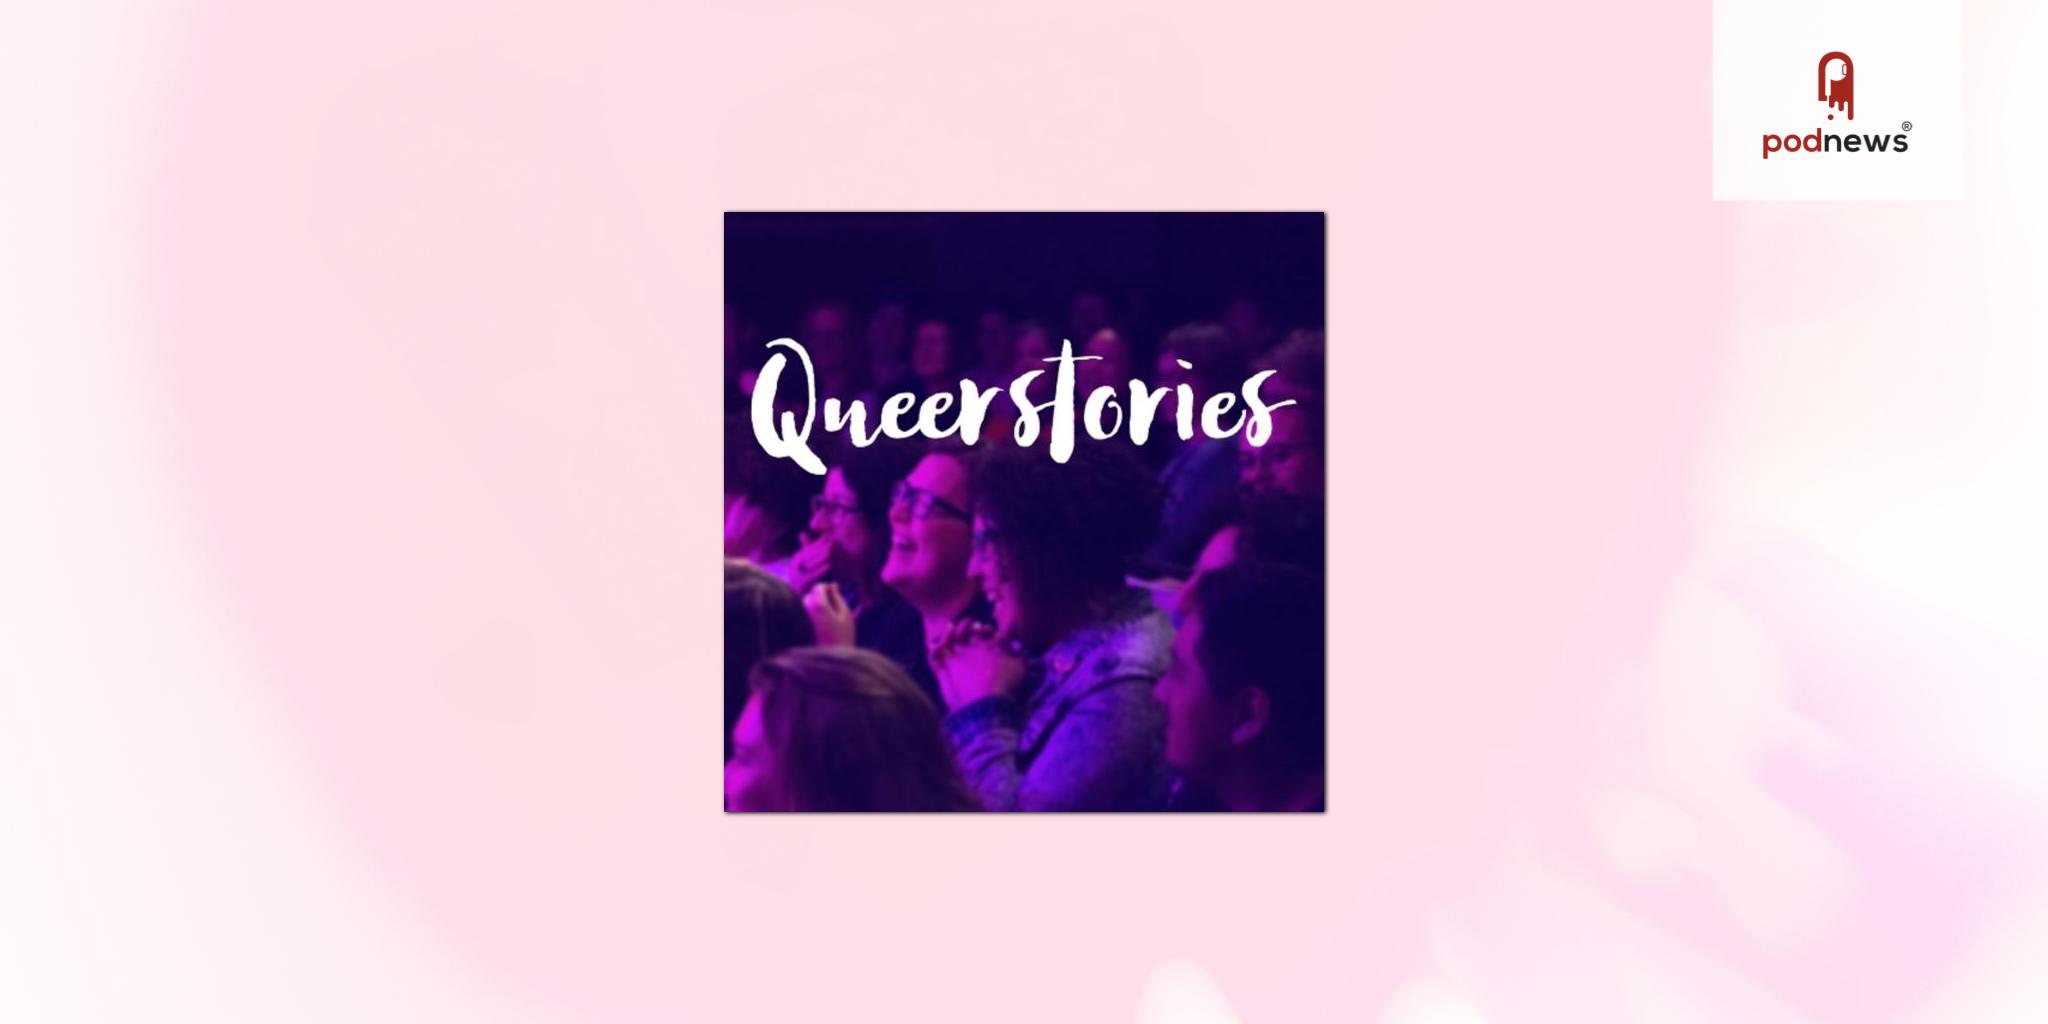 Award-winning podcast Queerstories back with Season 3 and joins the Acast Creator Network